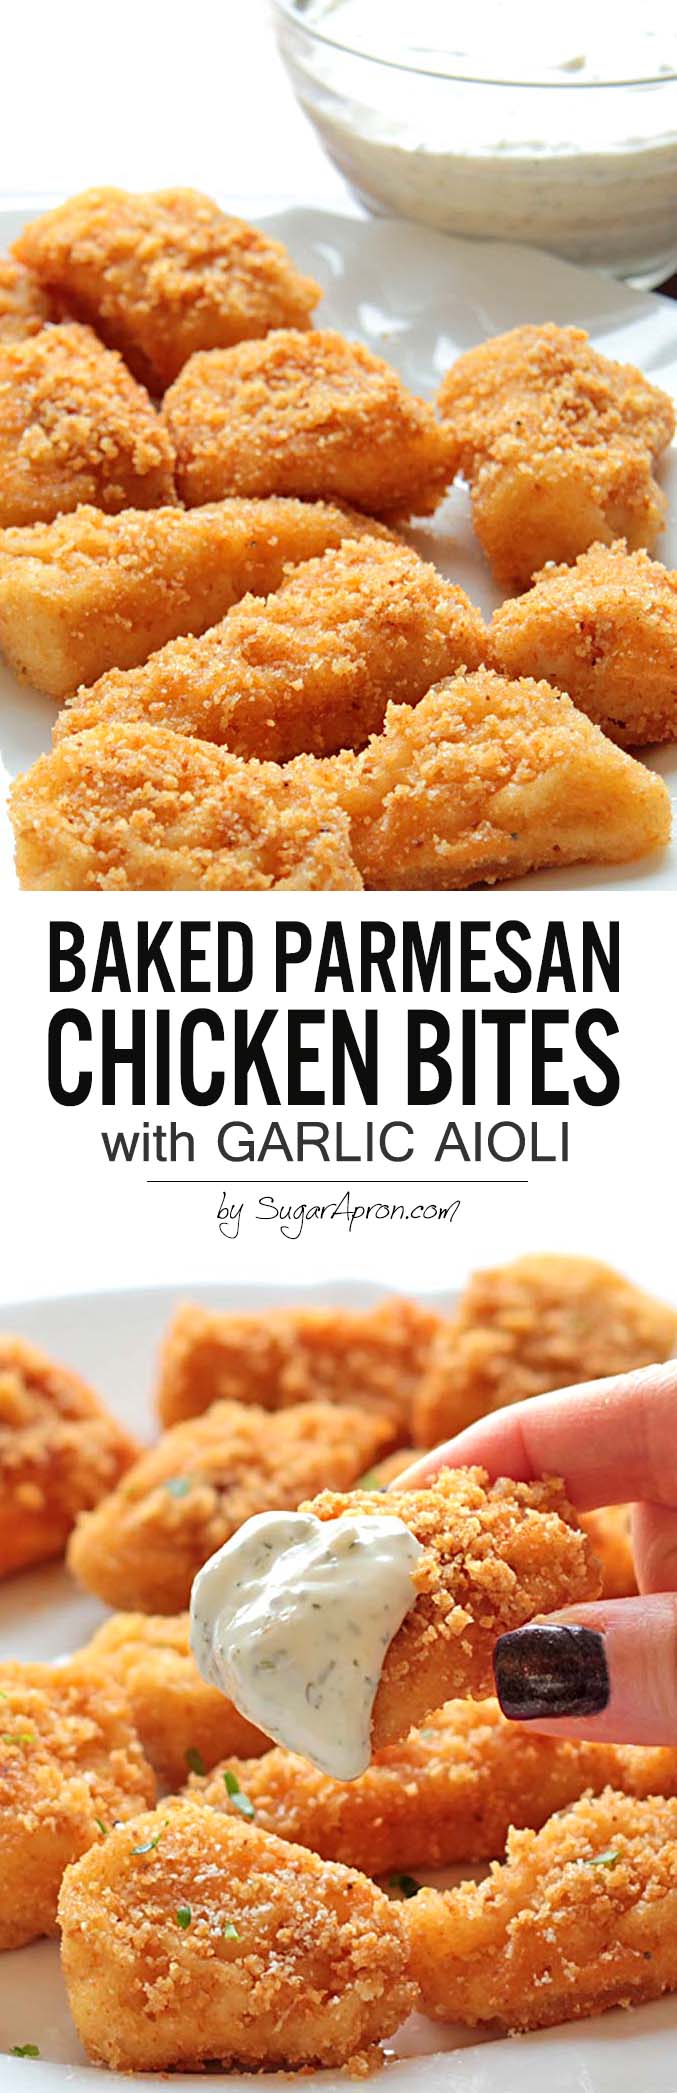 These Baked Parmesan Chicken Bites are so delicious and ridiculously easy. With only 5 ingredients, how can you not try these bad boys out?!